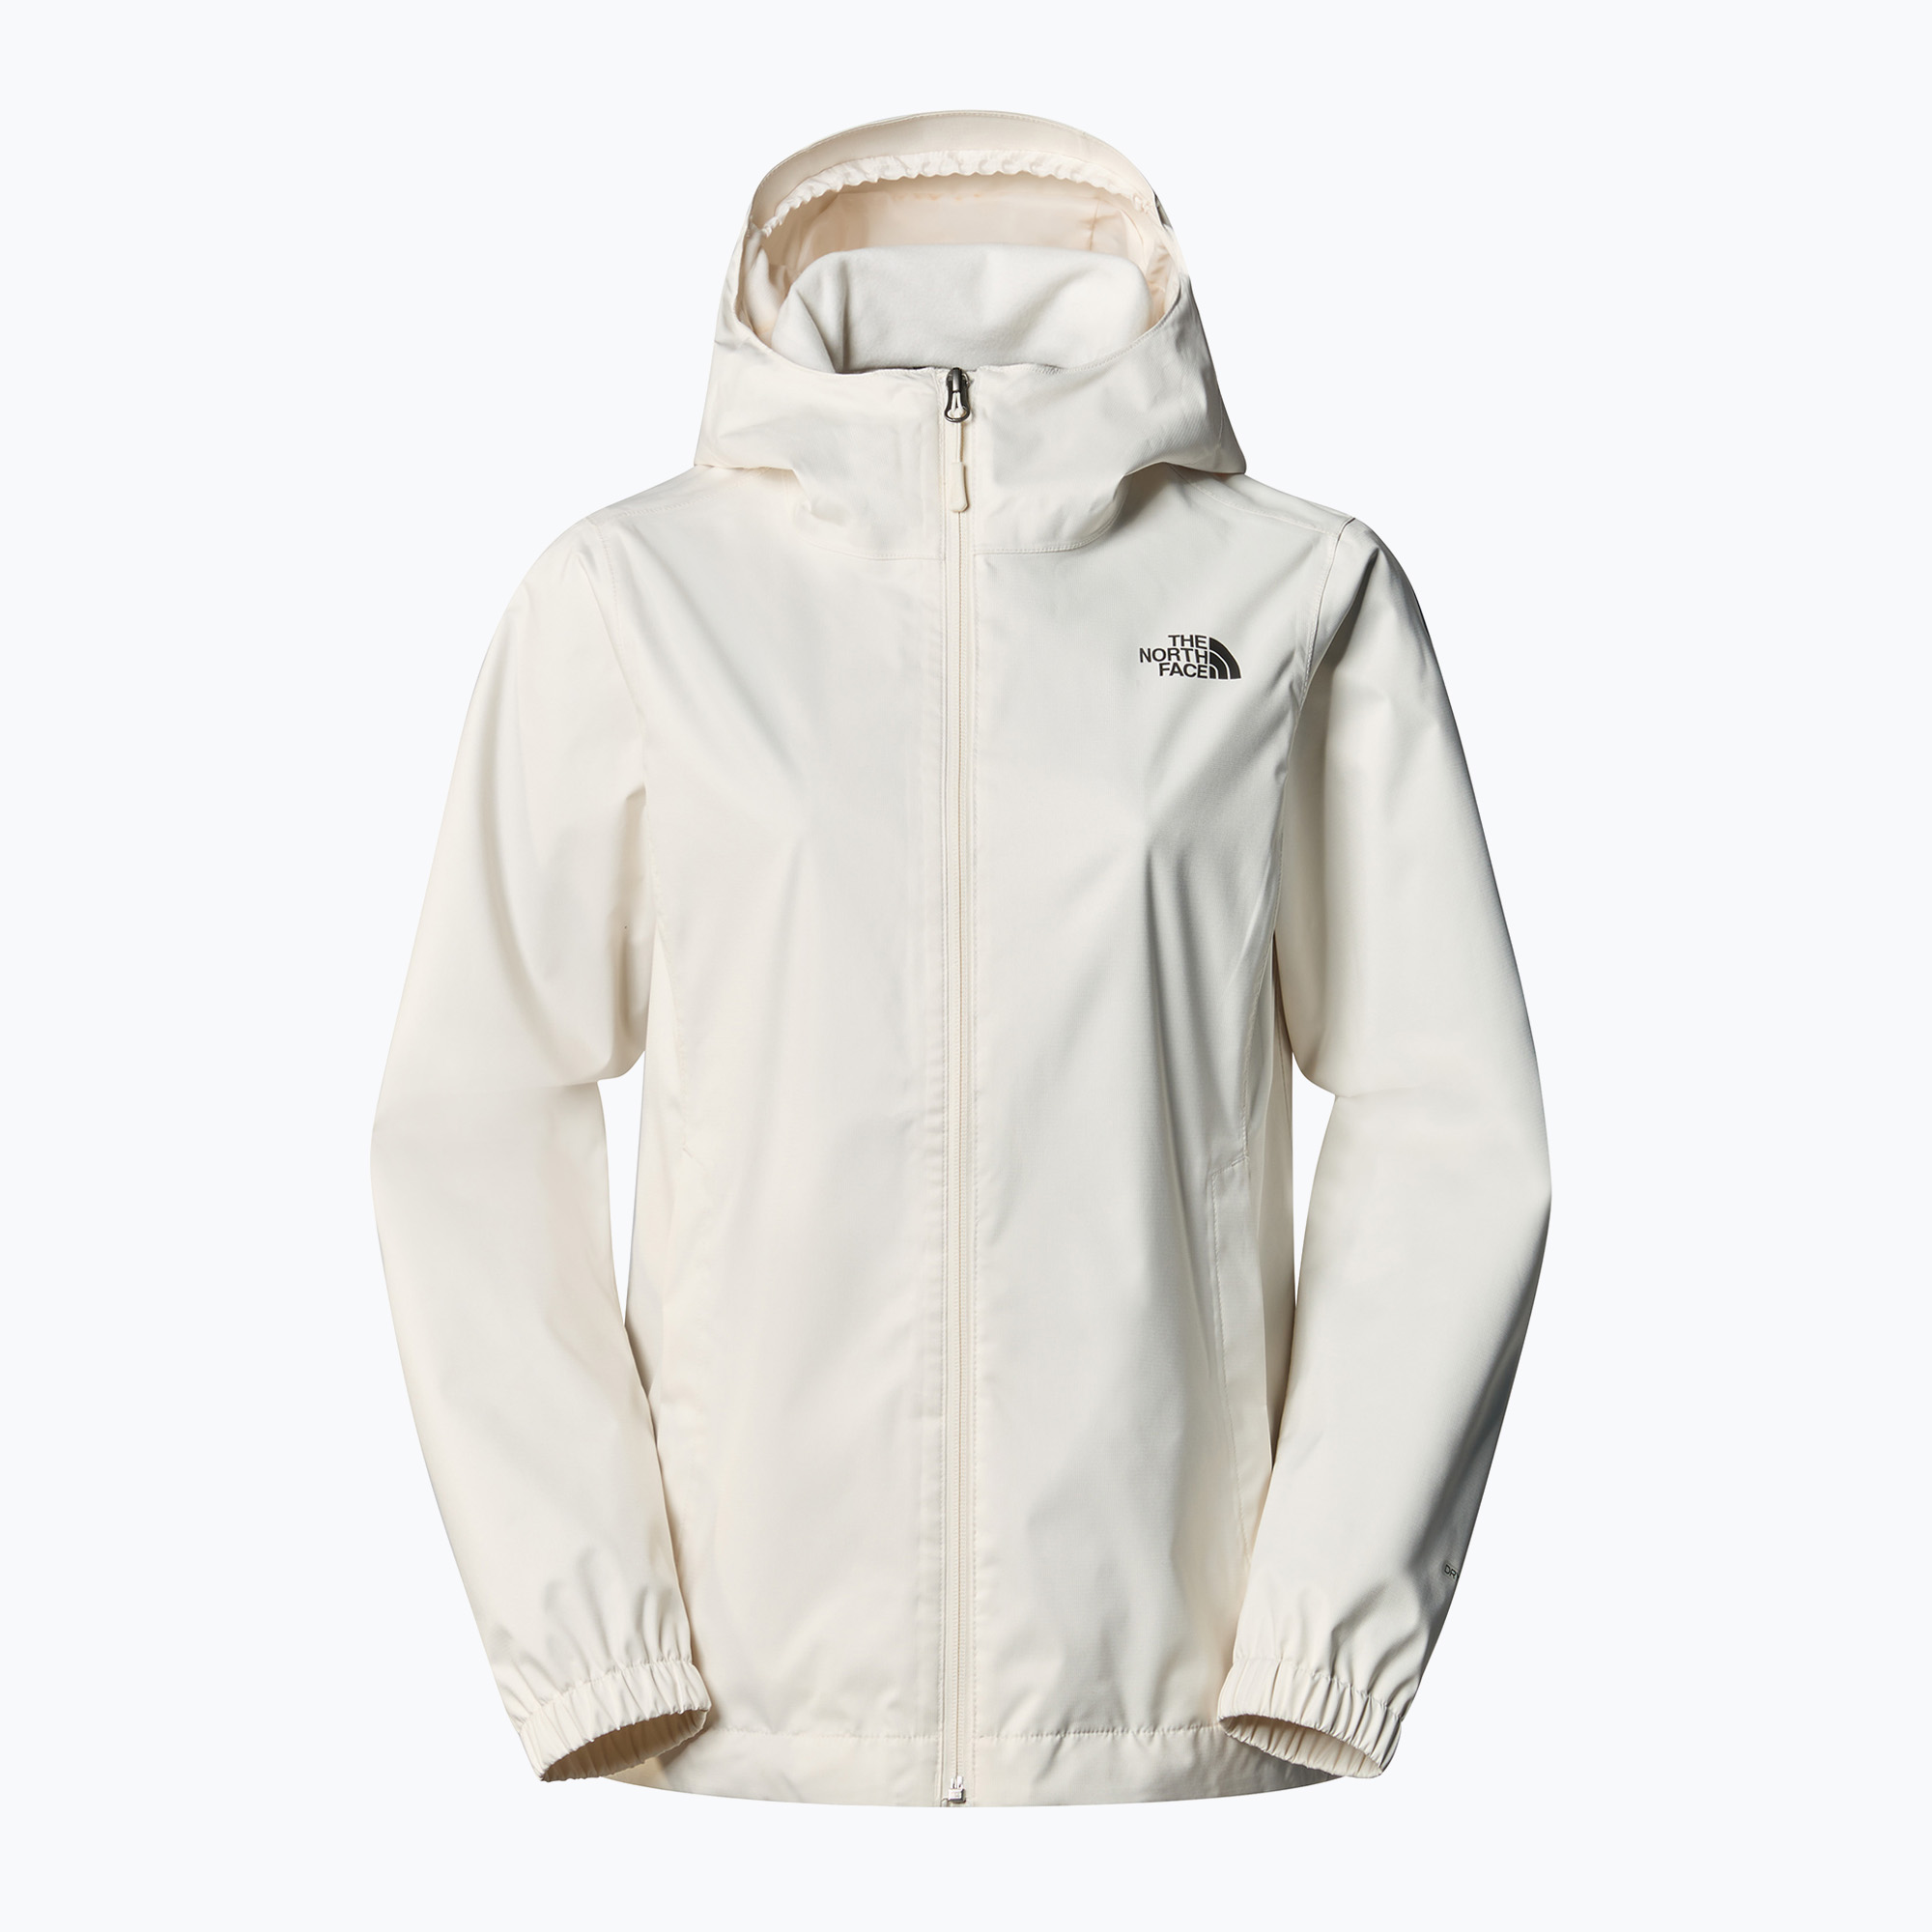 Дъждобран за жени The North Face Quest white dune